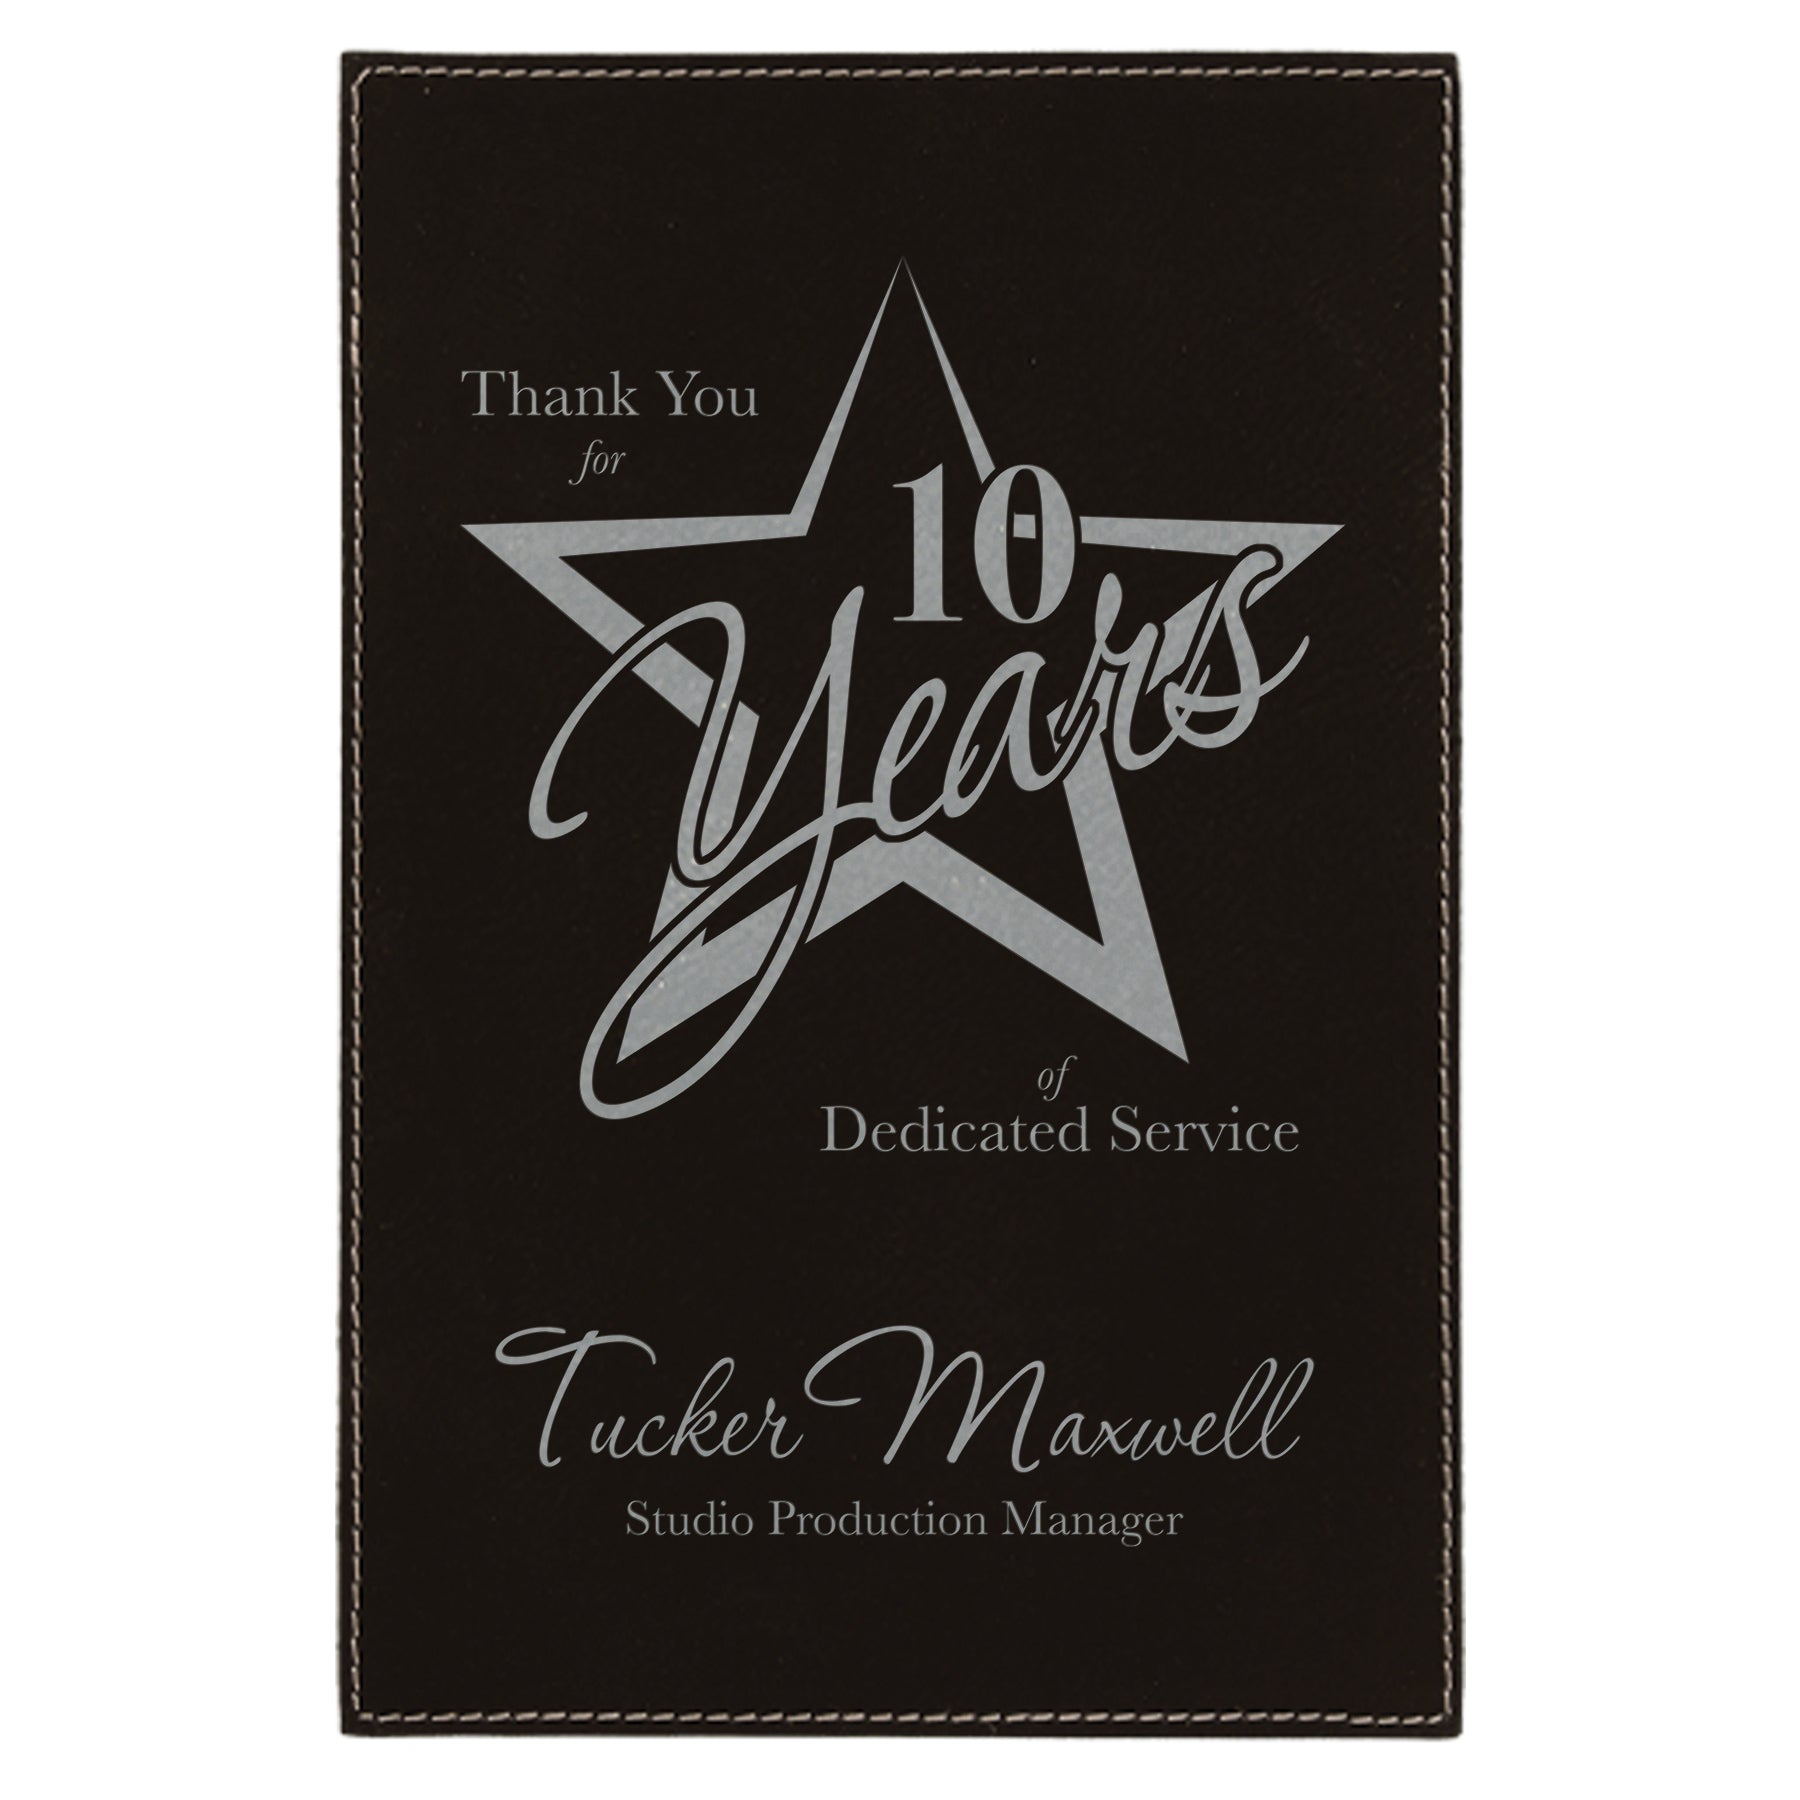 Plaque Plate, Laserable Leatherette, 4" x 6", Laser Engraved Plaque Plate Craftworks NW Black/Silver 